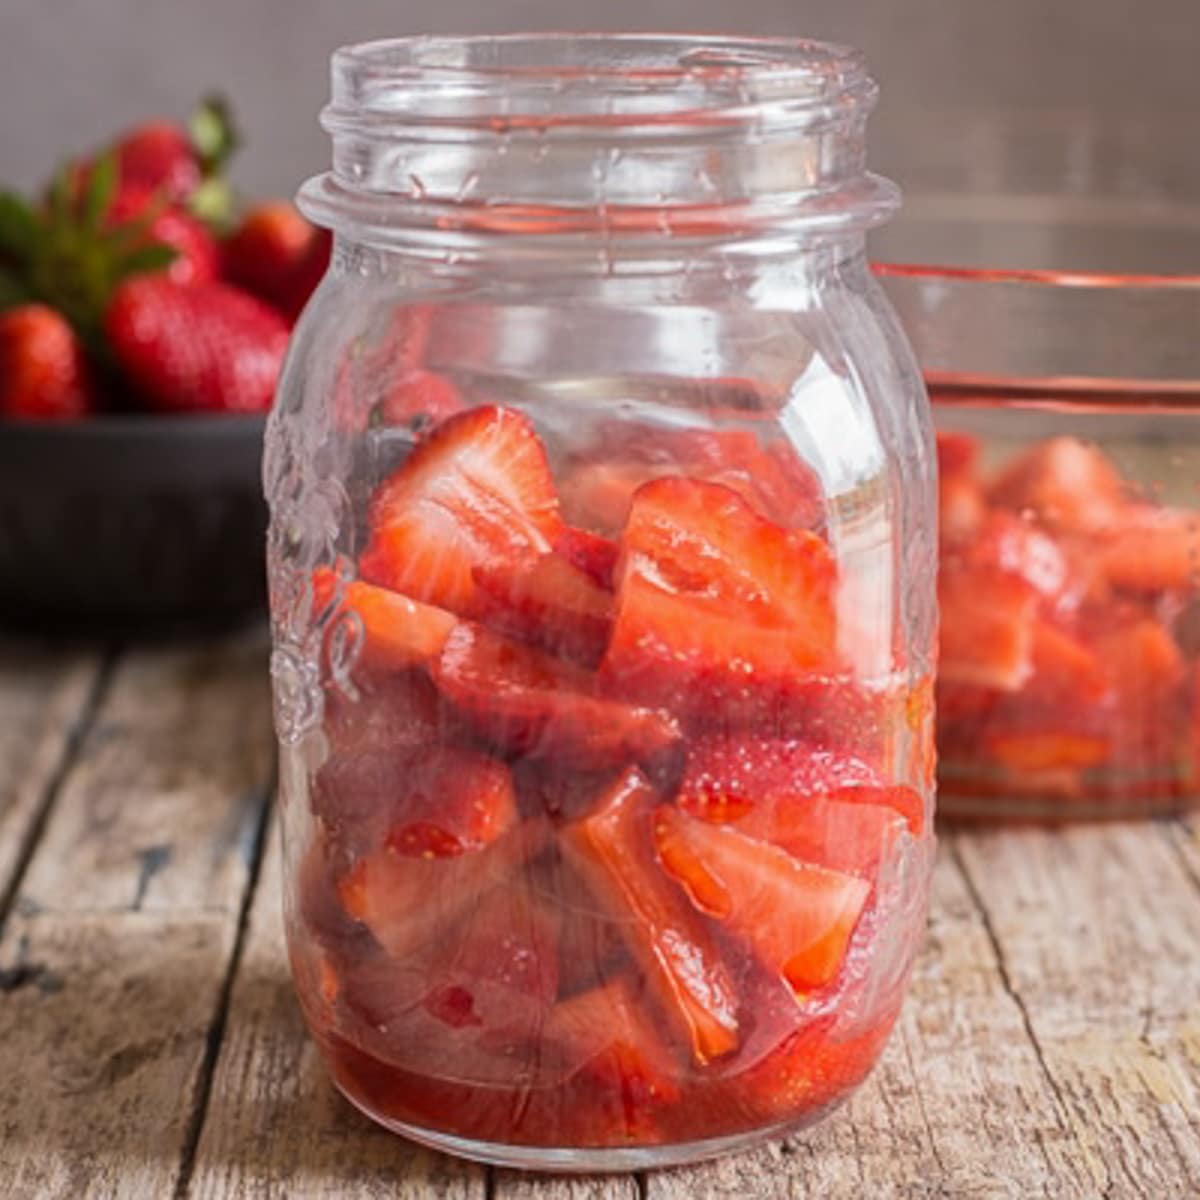 How to Freeze Strawberries Whole or Sliced